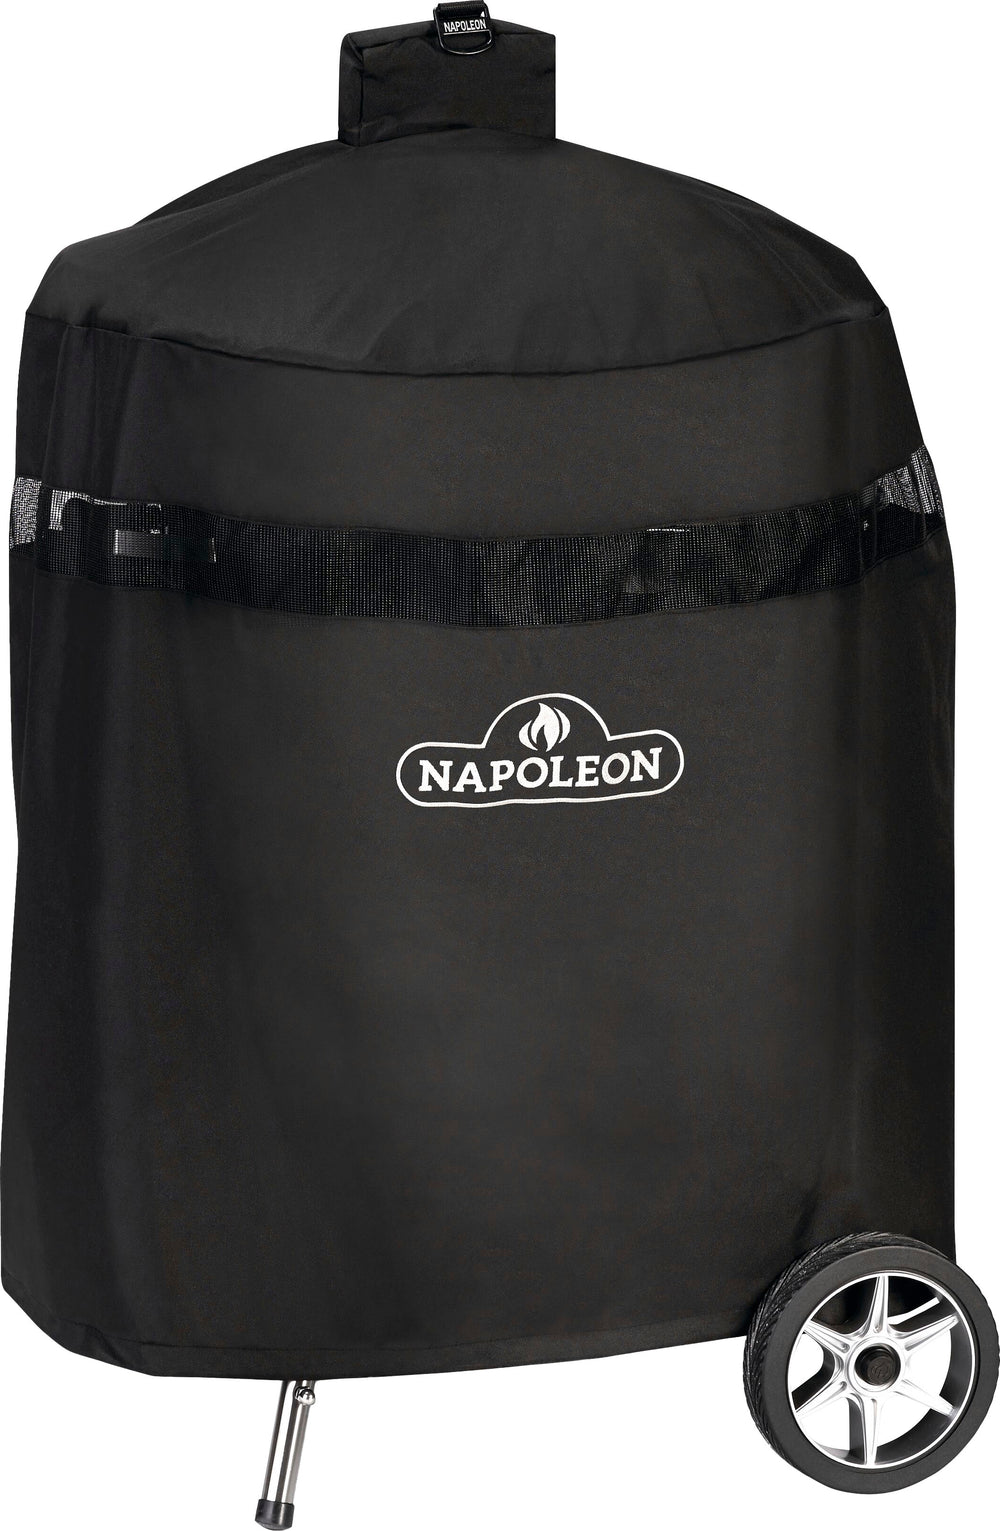 Napoleon - 22" Charcoal Kettle Grill with Legs Premium Cover - Black_1